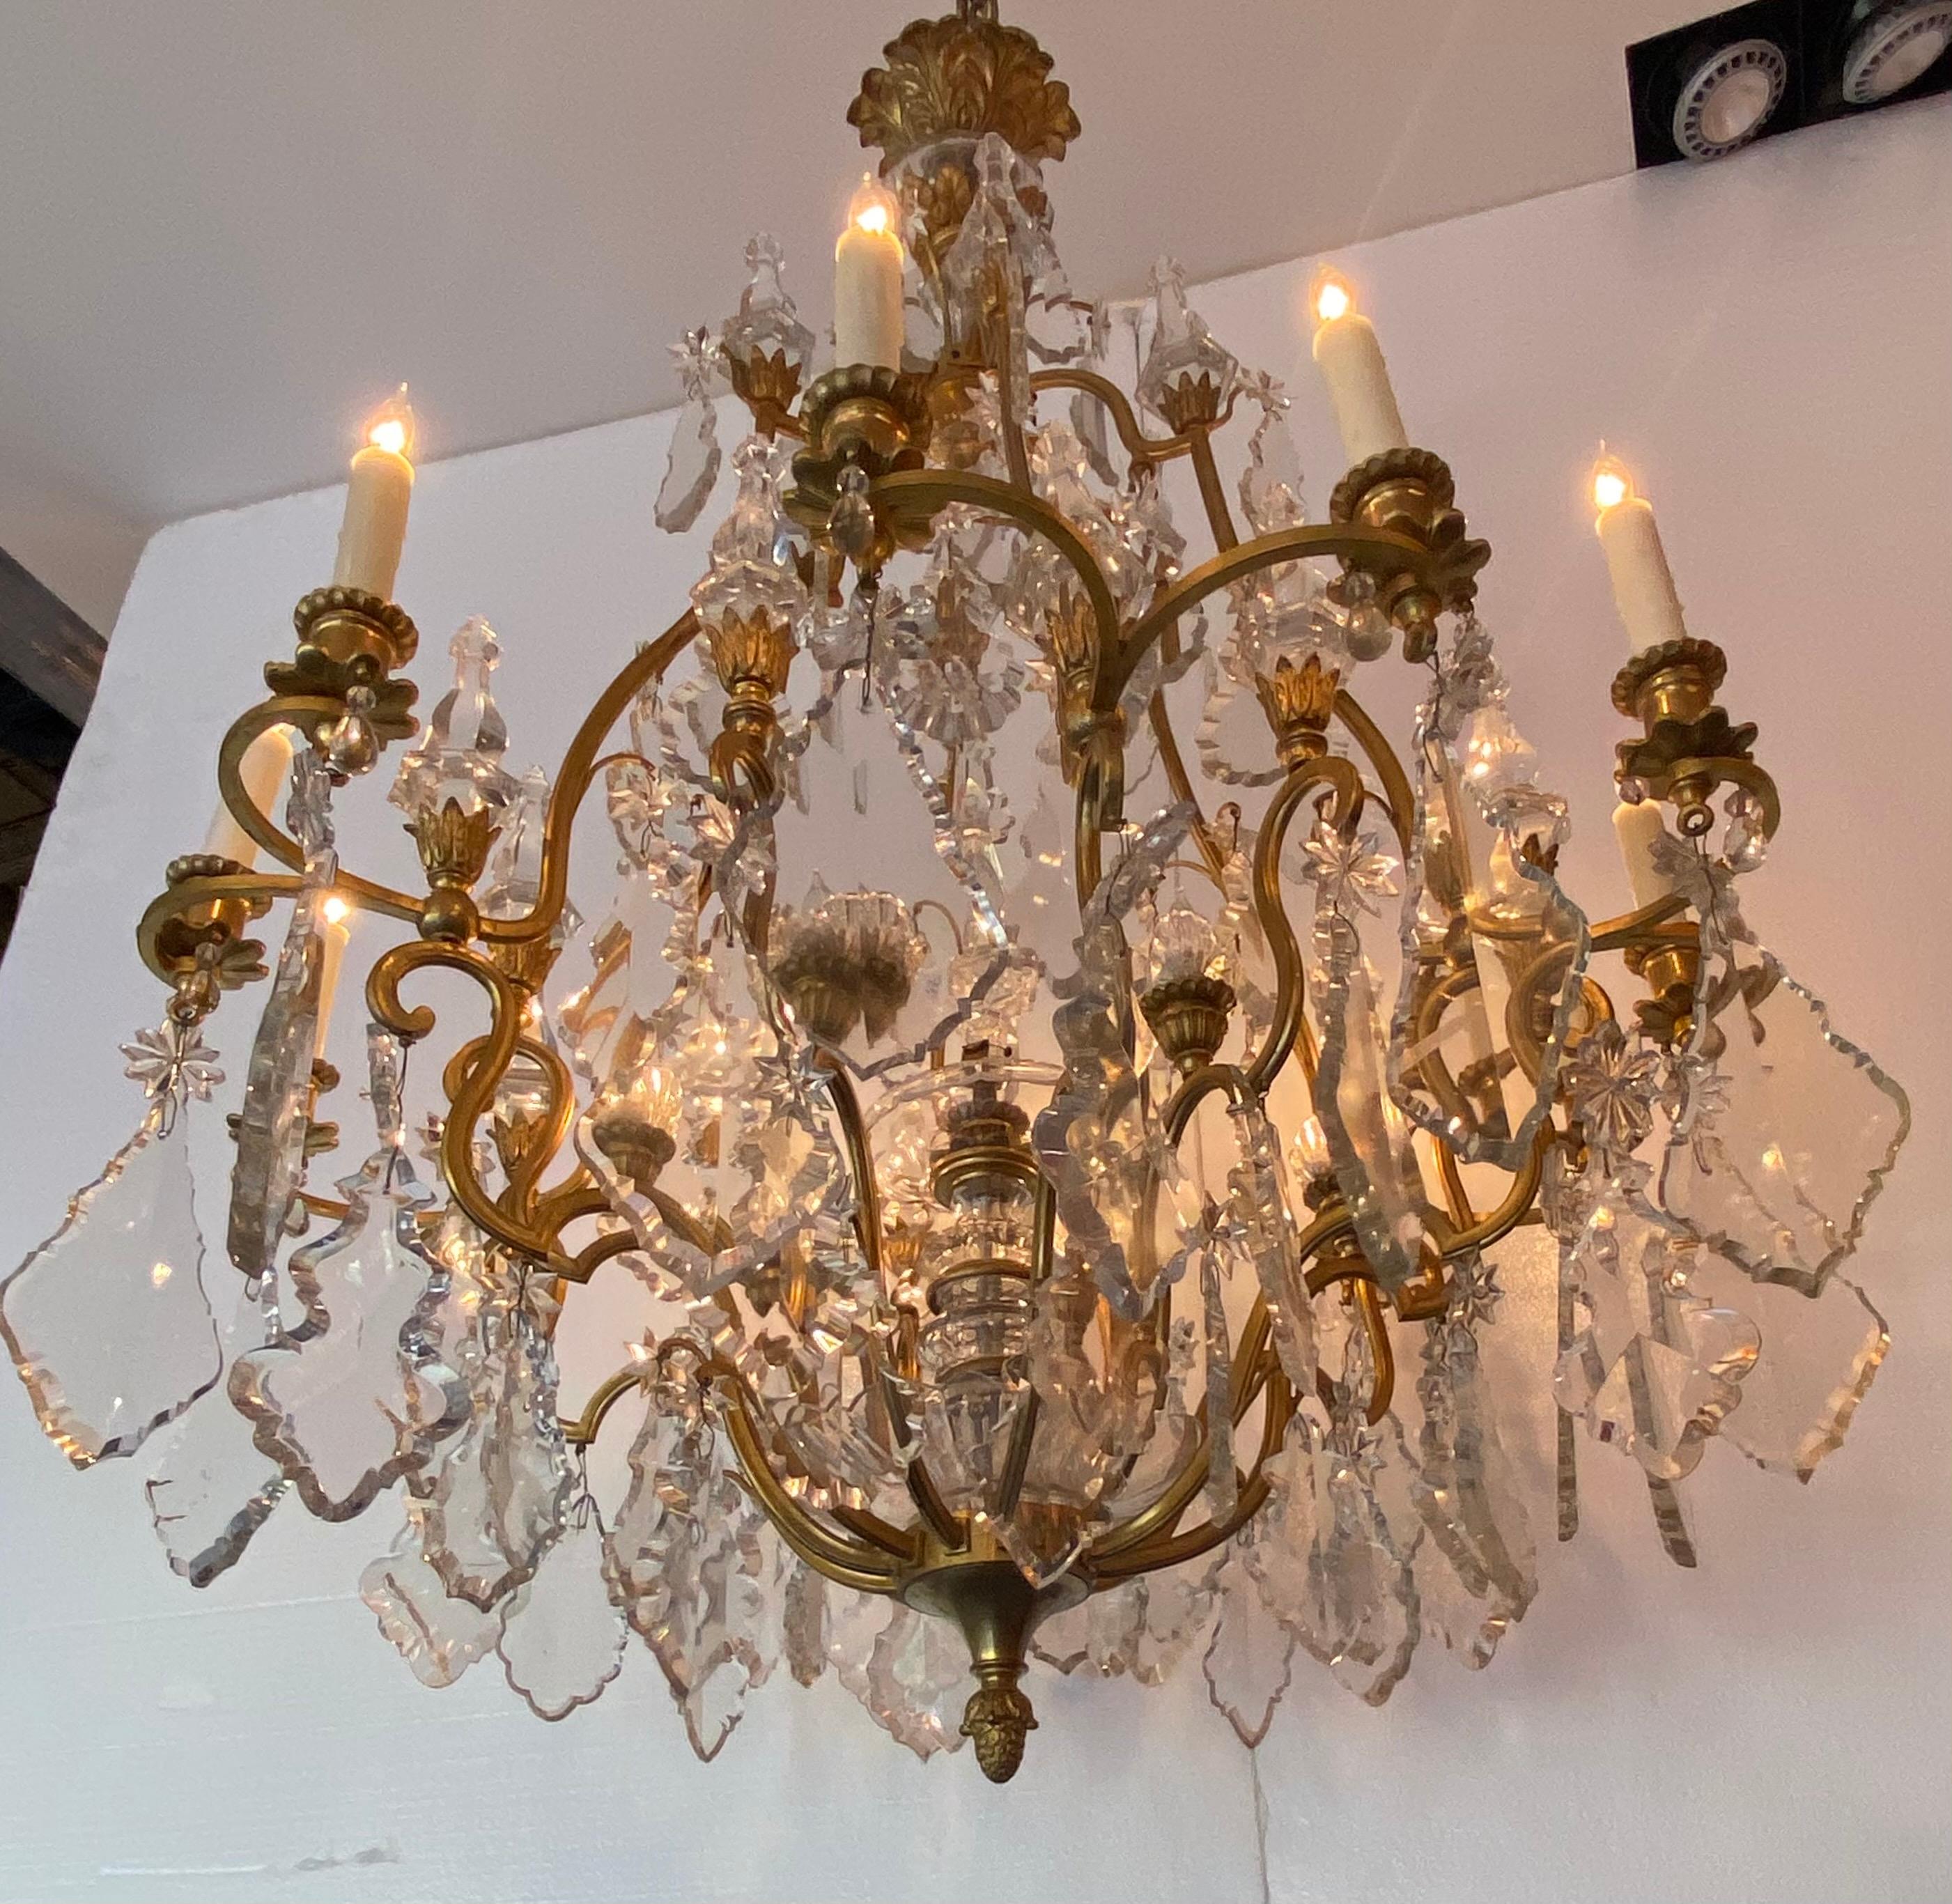 19th century French Empire crystal chandelier. 18 light with 18 4